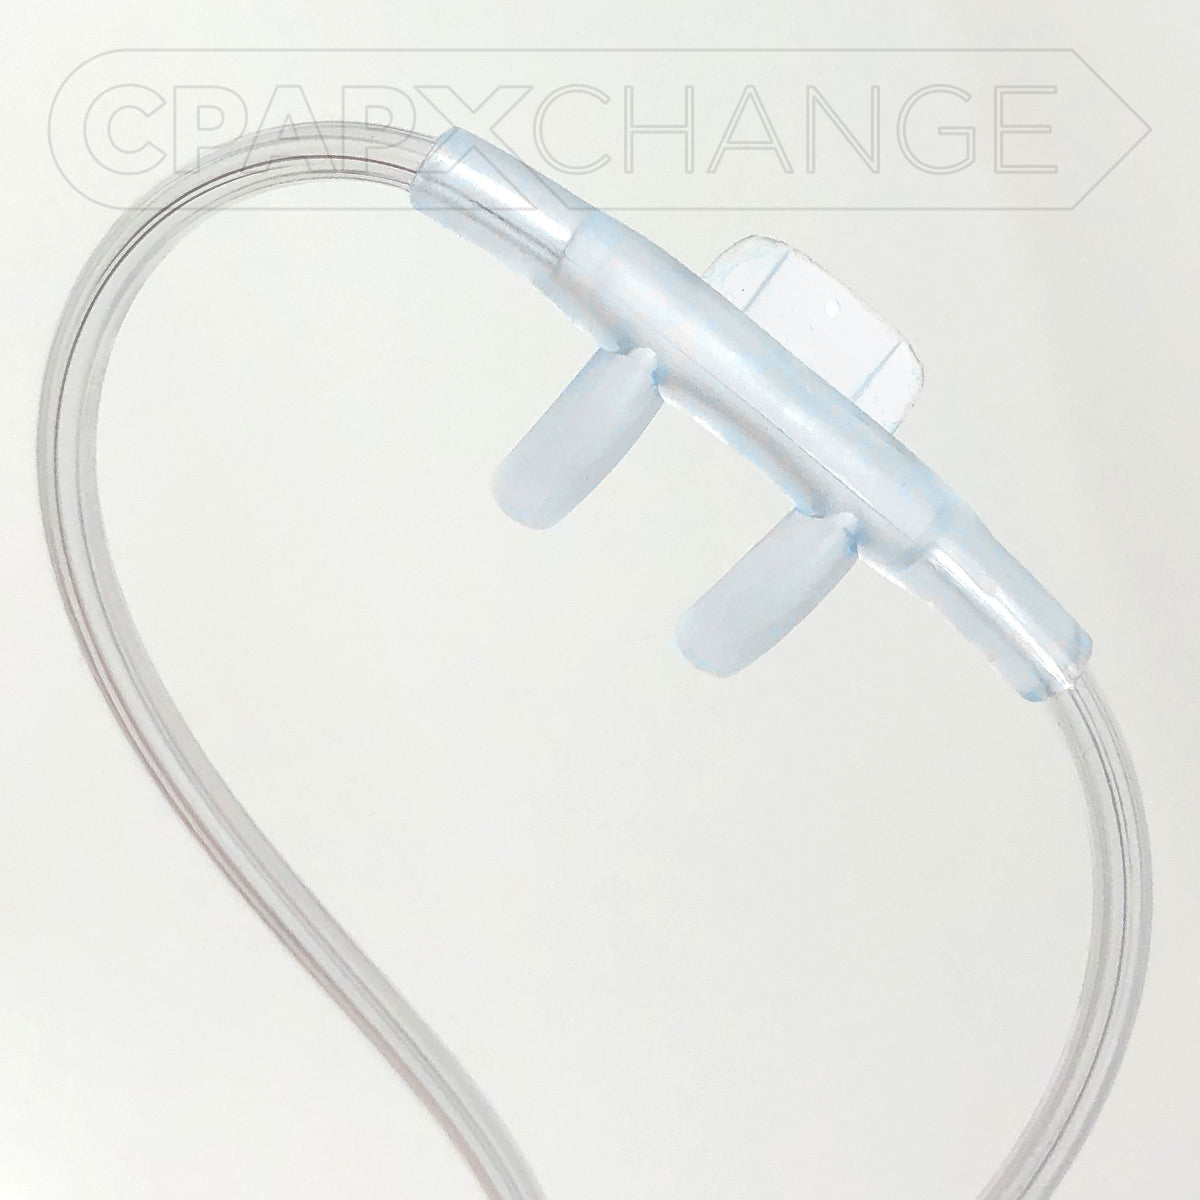 React Standard Nasal Cannula with 12 Foot Oxygen Supply Tubing